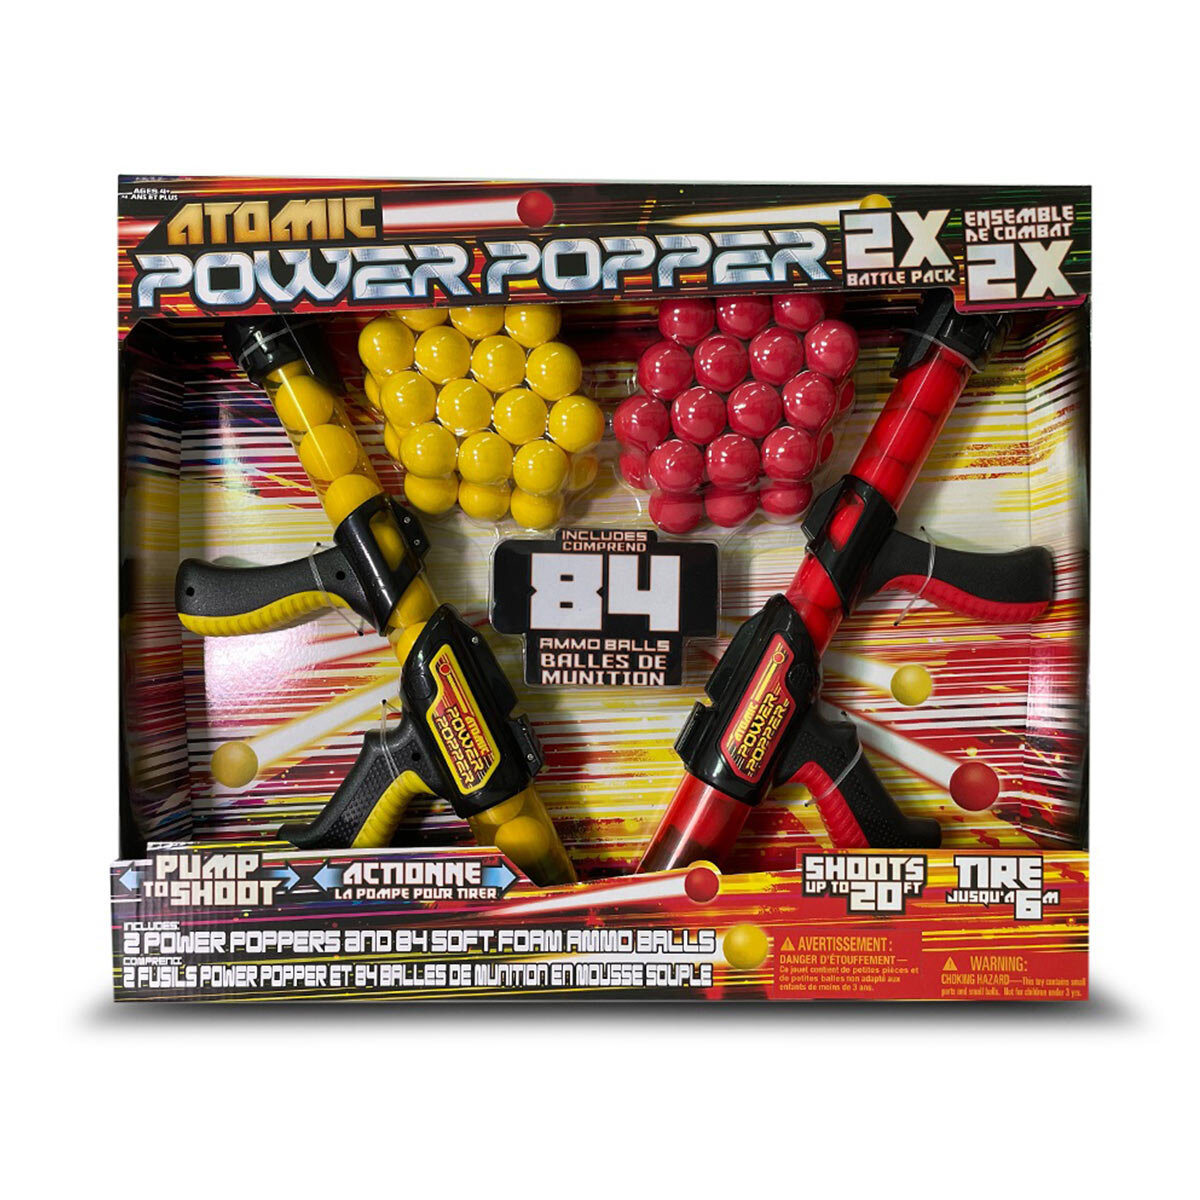 Buy Atomic Power Popper 2 Blaster Battle Pack Overview Image at Costco.co.uk